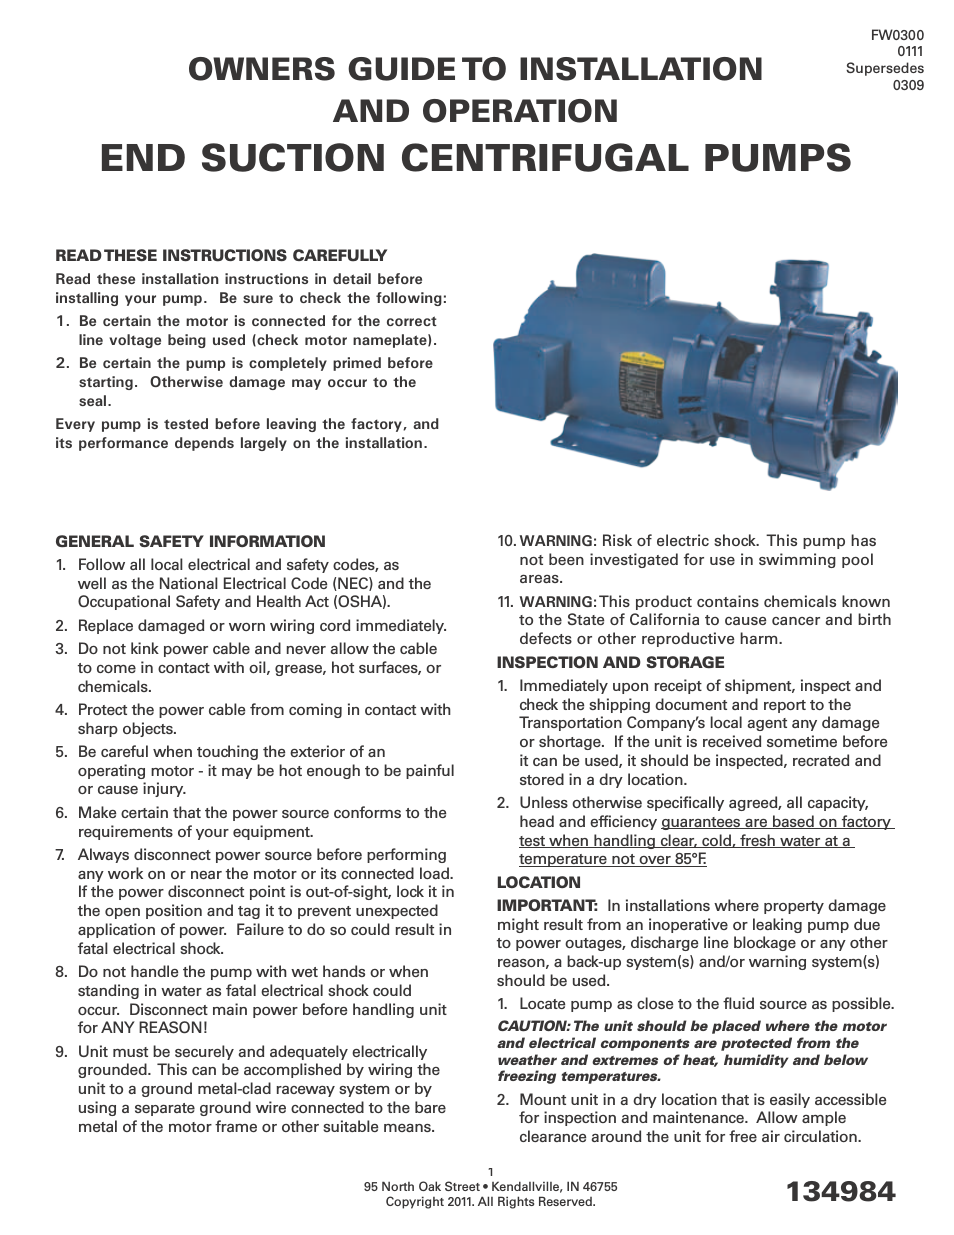 Centrifugal Packages - end suction centrifugal pumps